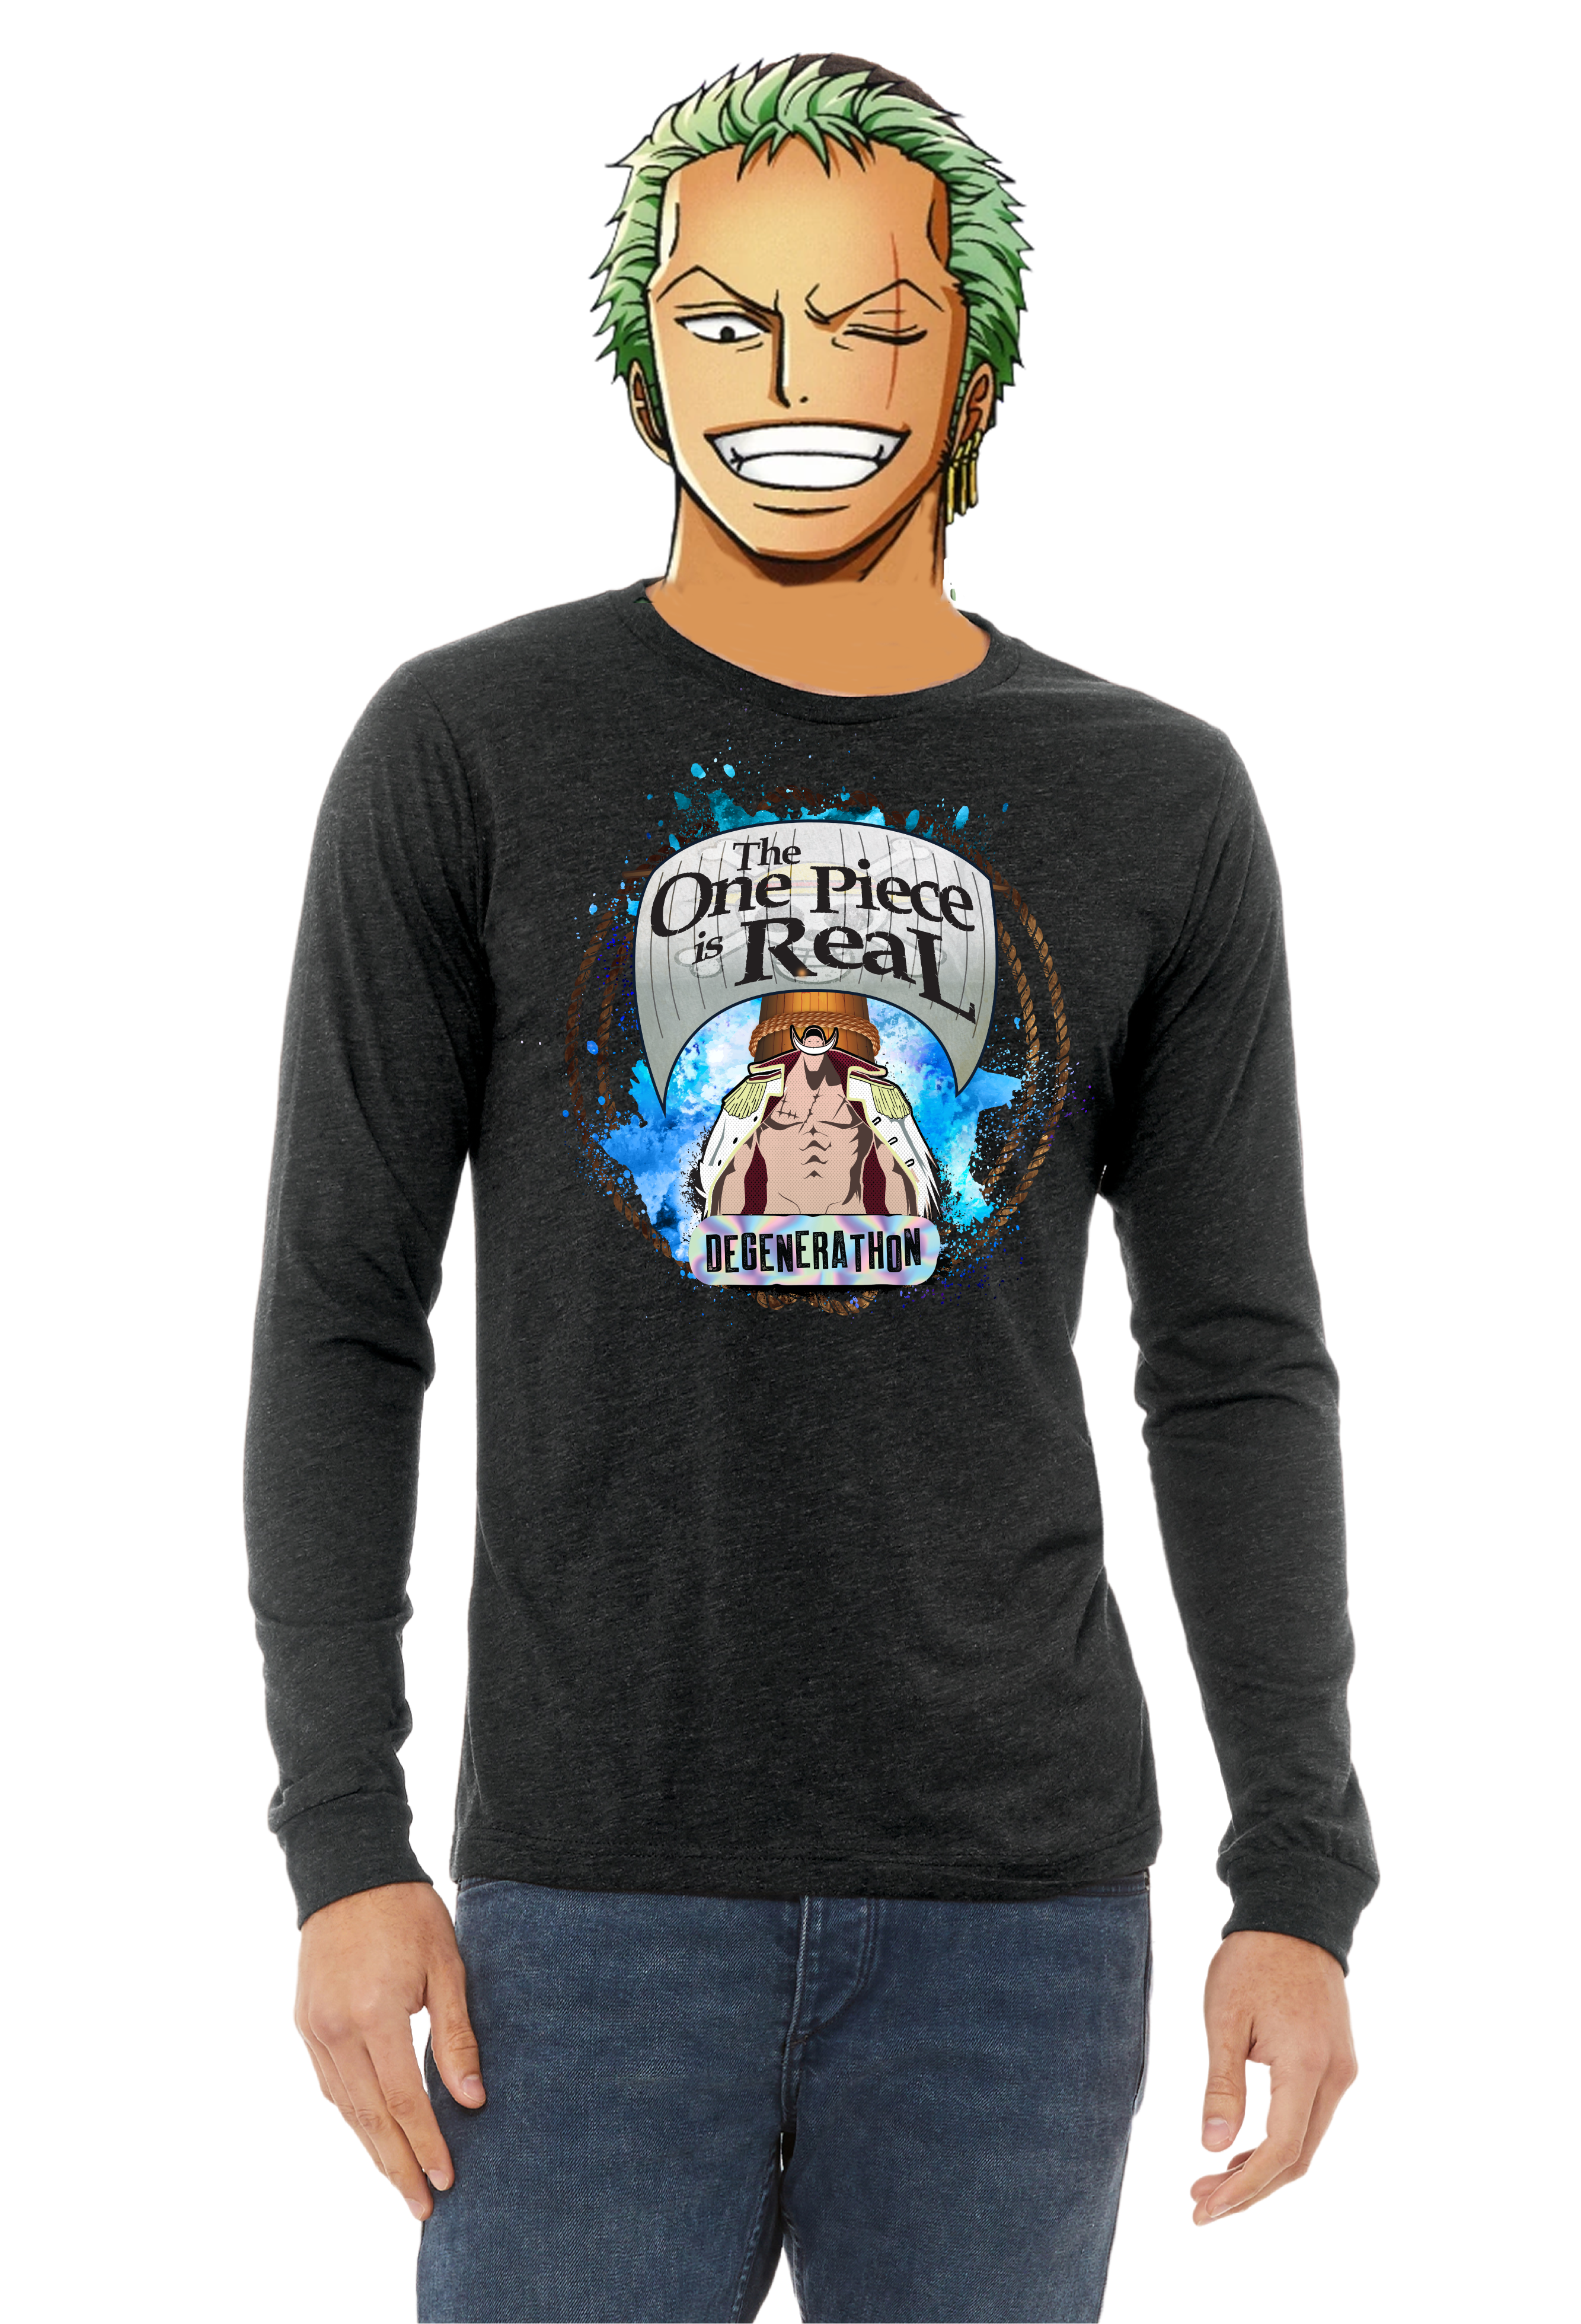 One Piece is Real ~ Unisex Long Sleeve Triblend Tshirt